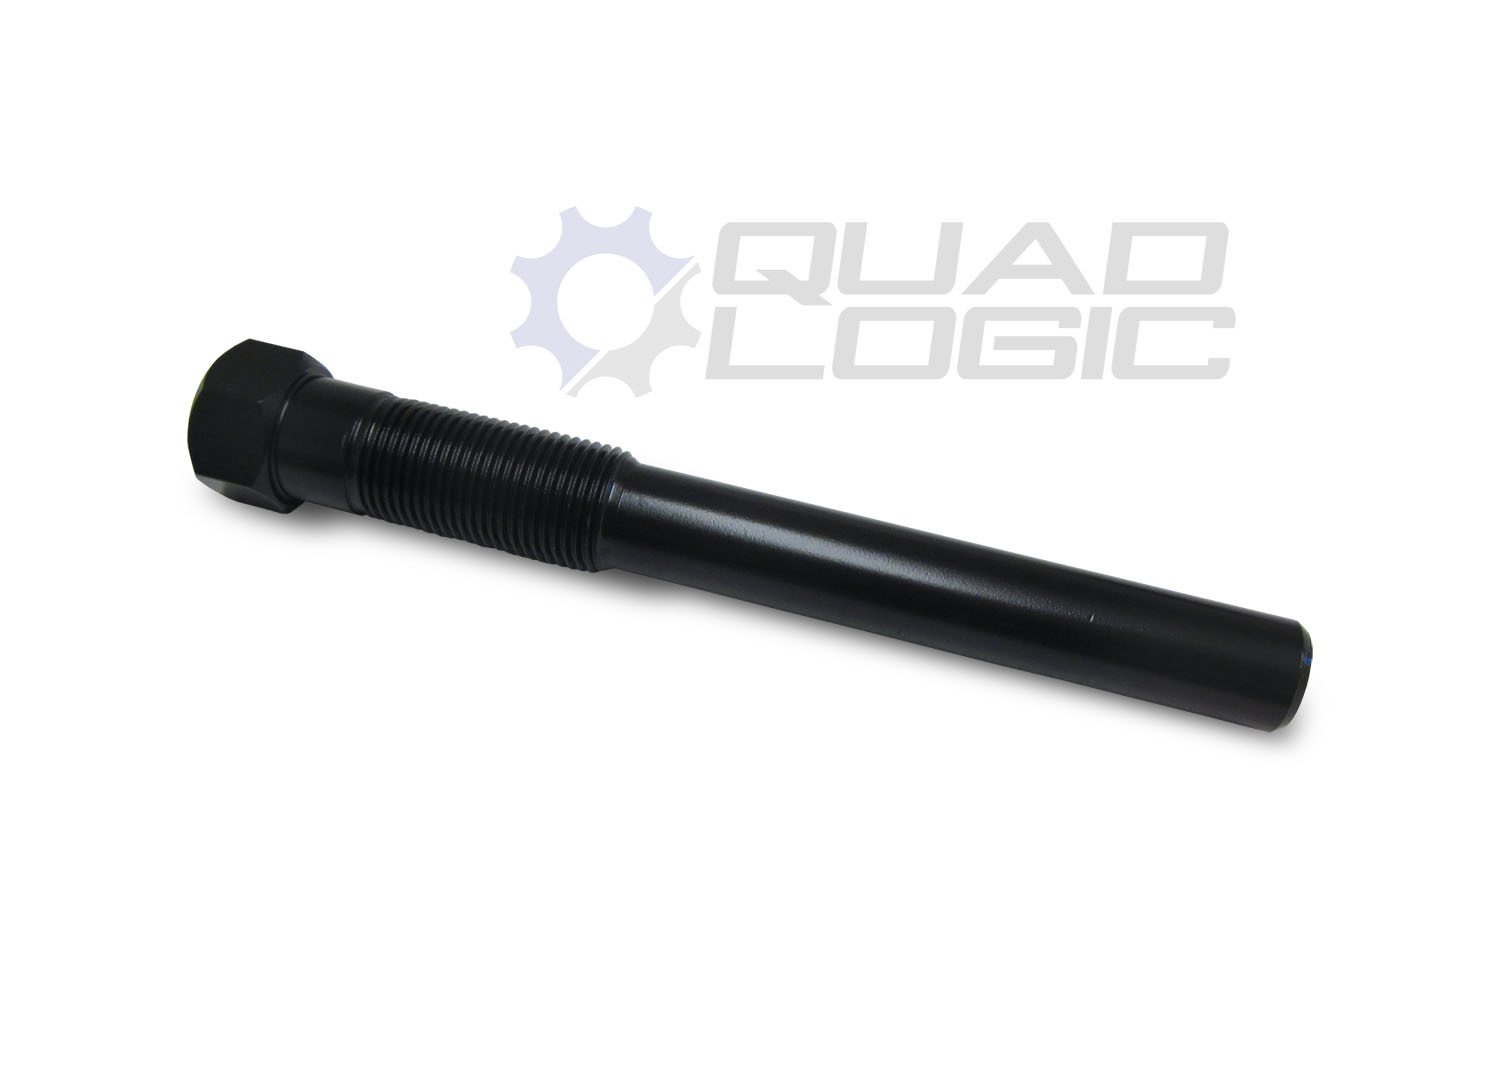 2008-2014 POLARIS RZR 800 PRIMARY DRIVE CLUTCH PULLER REMOVER TOOL 